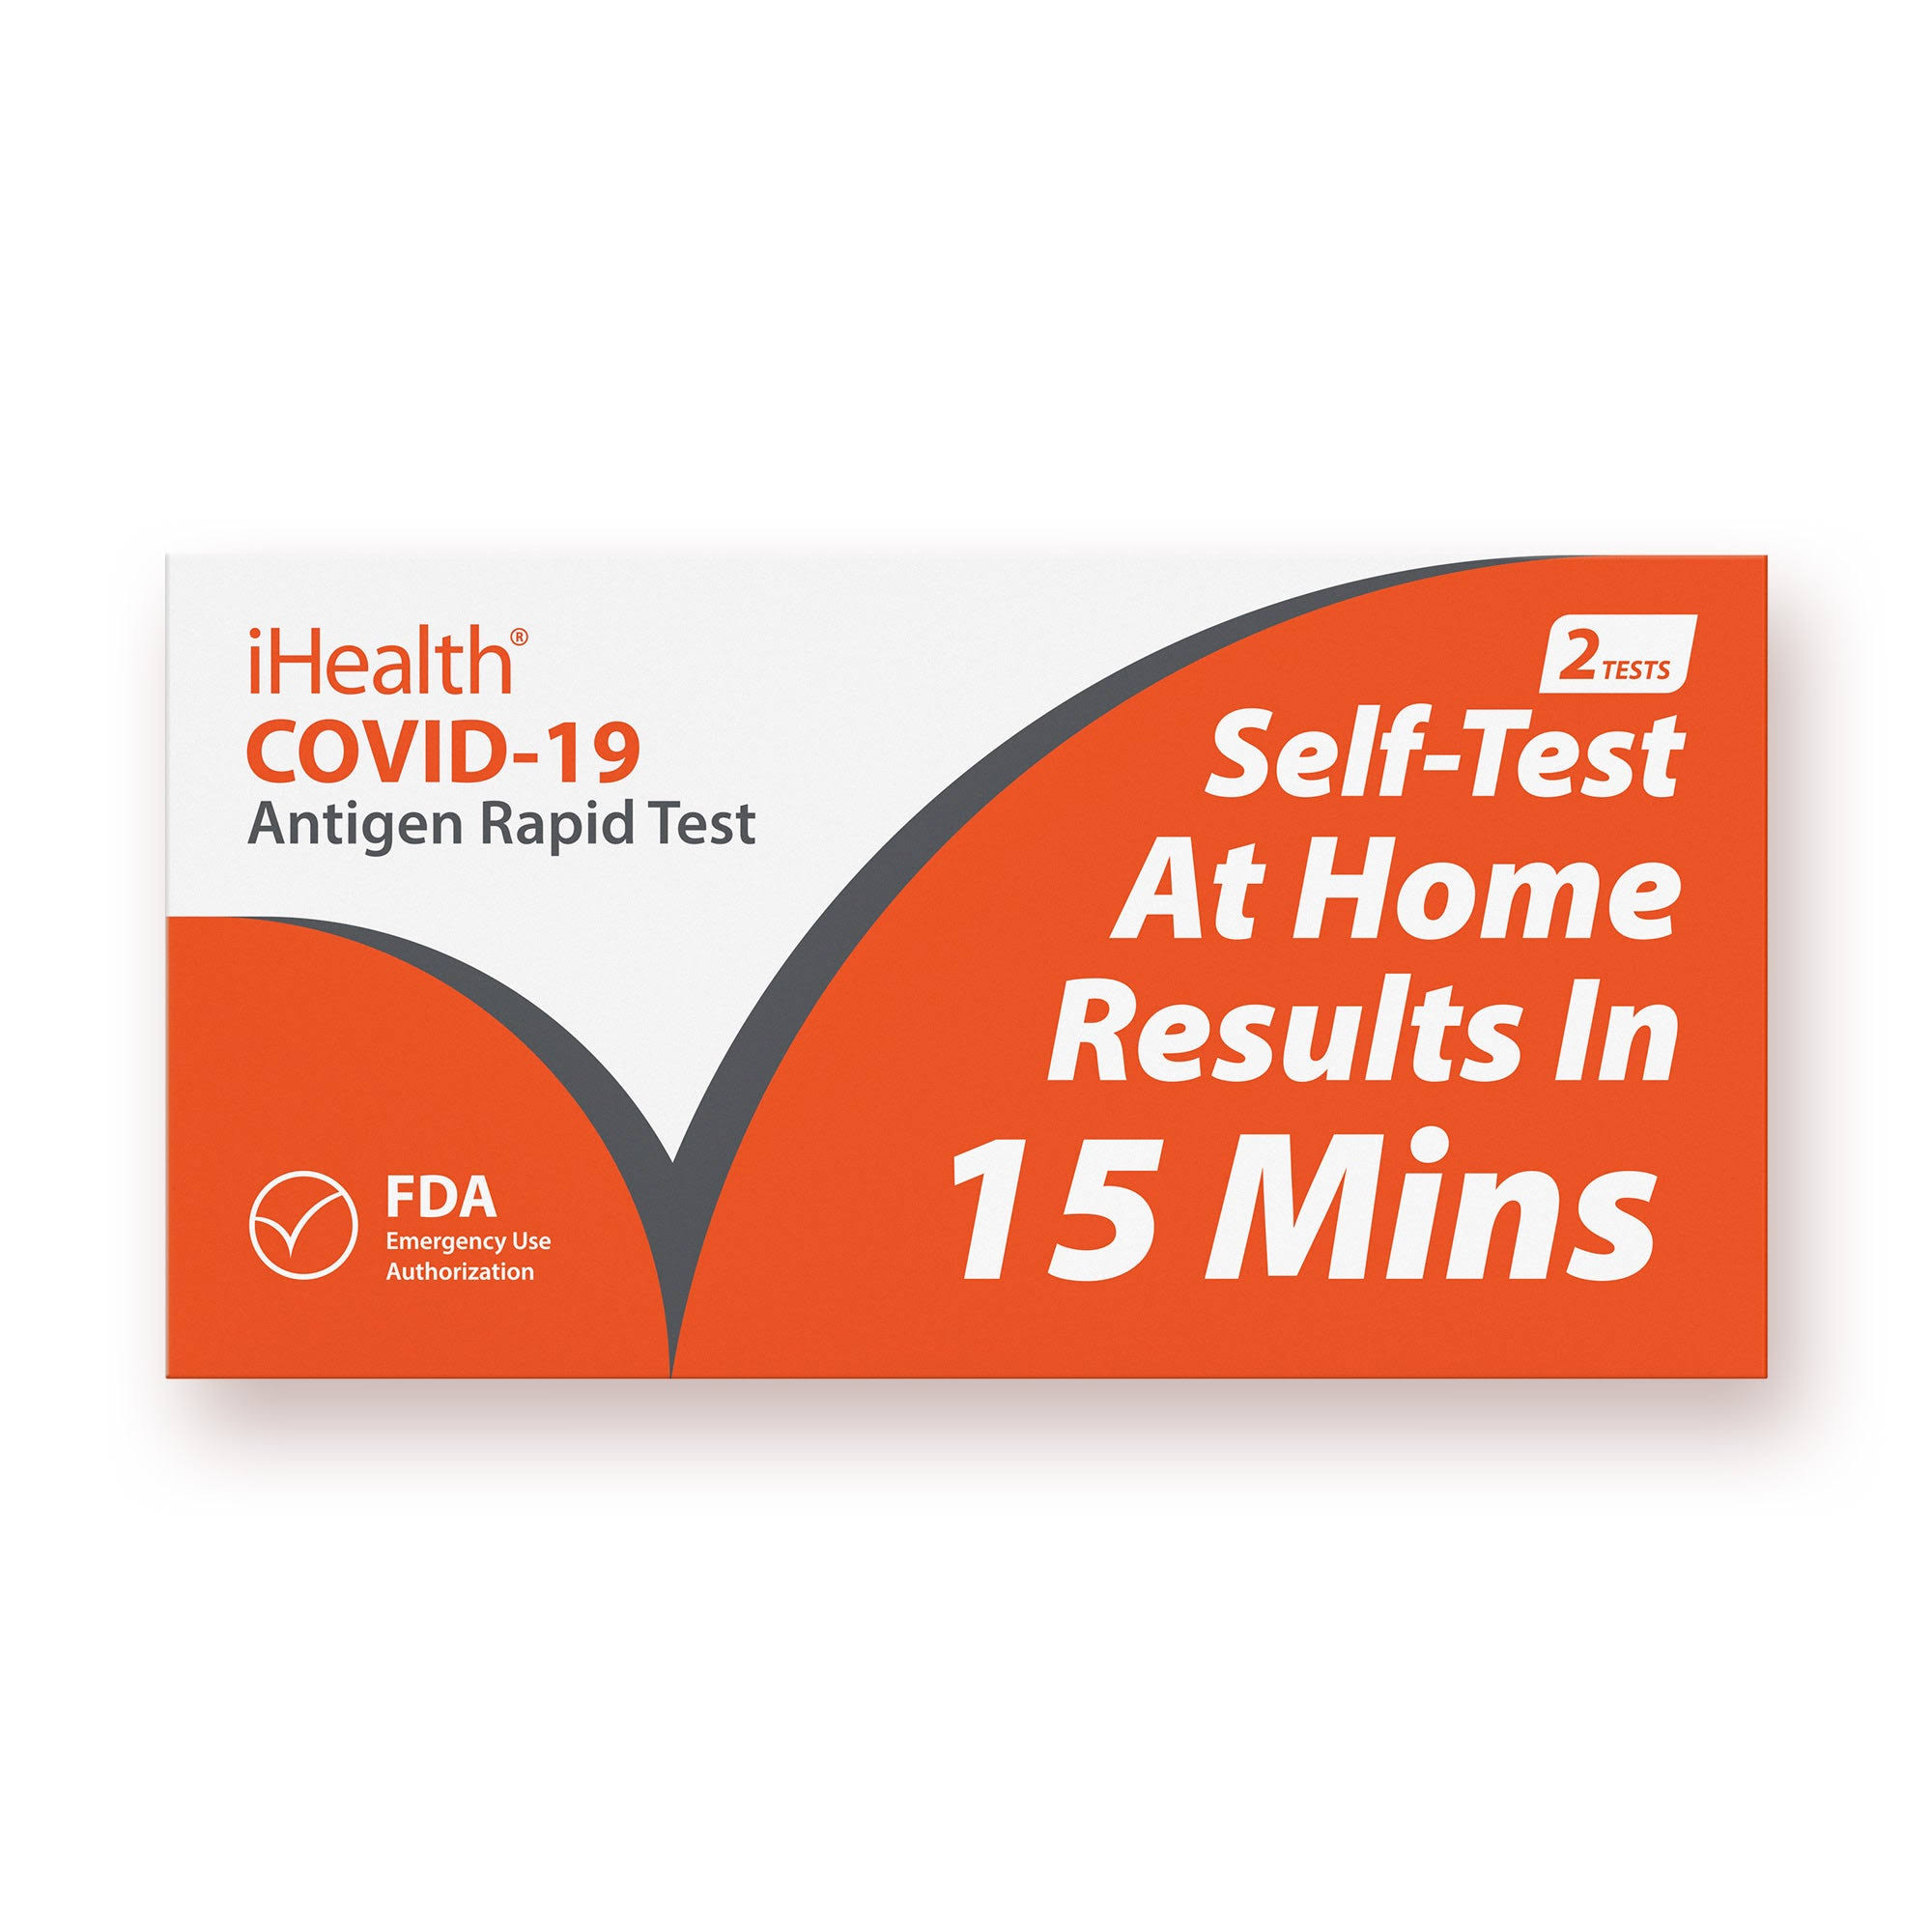 iHealth COVID-19 Antigen Rapid Test,FDA EUA Authorized OTC at-Home Self Test, Results In 15 Minutes With Non-invasive Nasal Swab